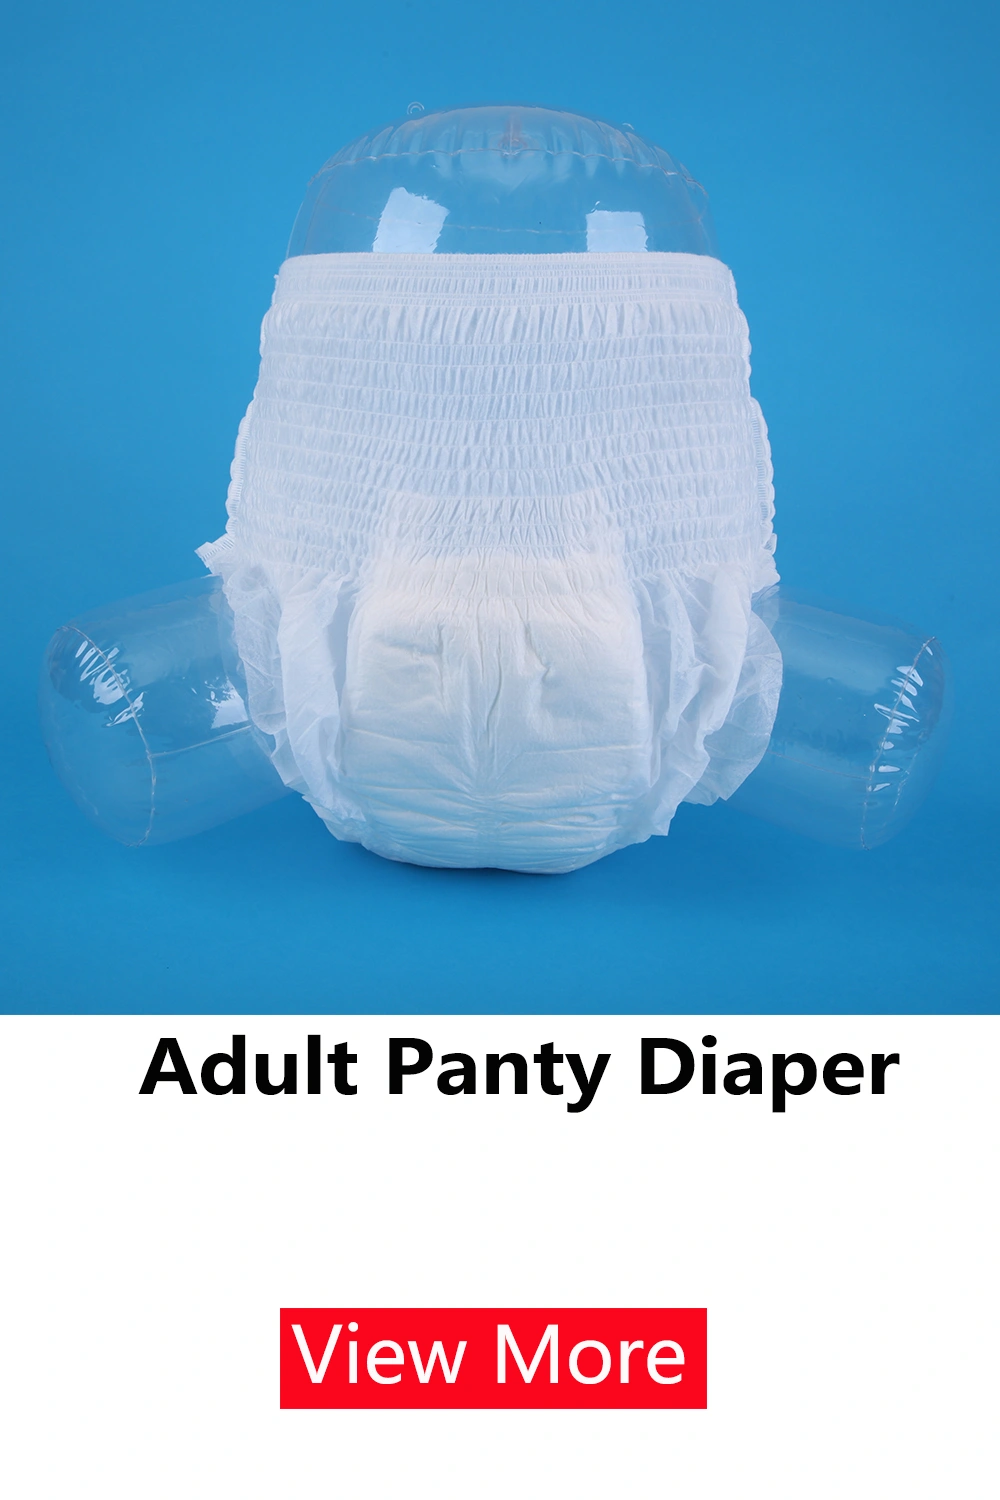 Dog Training Pads and adult panty diaper picture